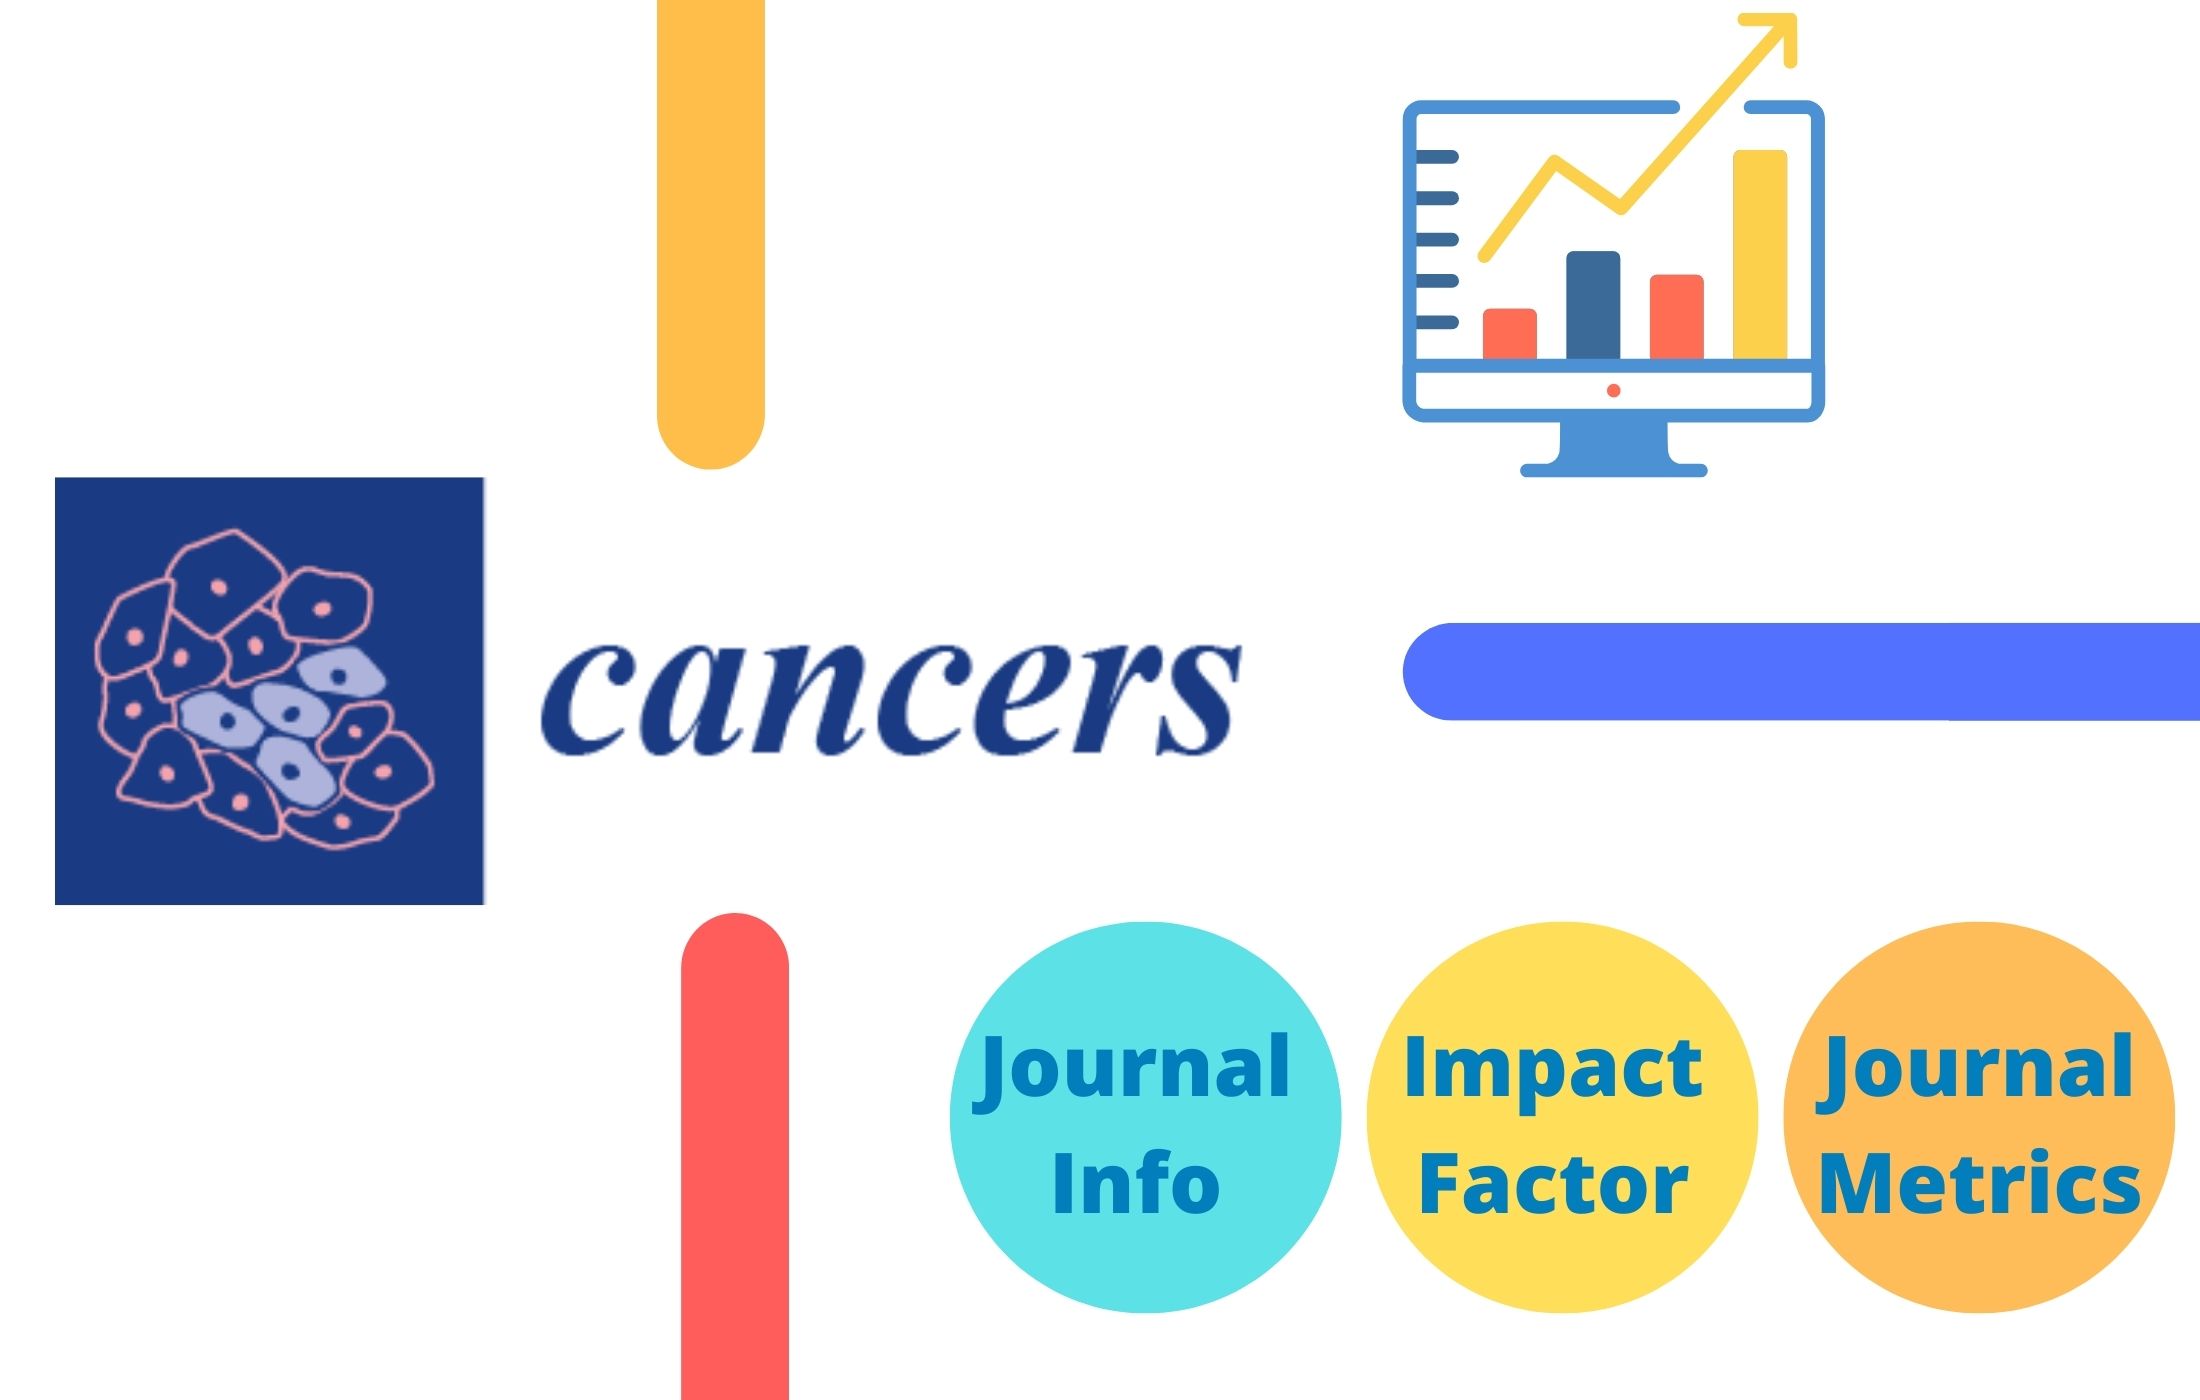 Cancers impact factor